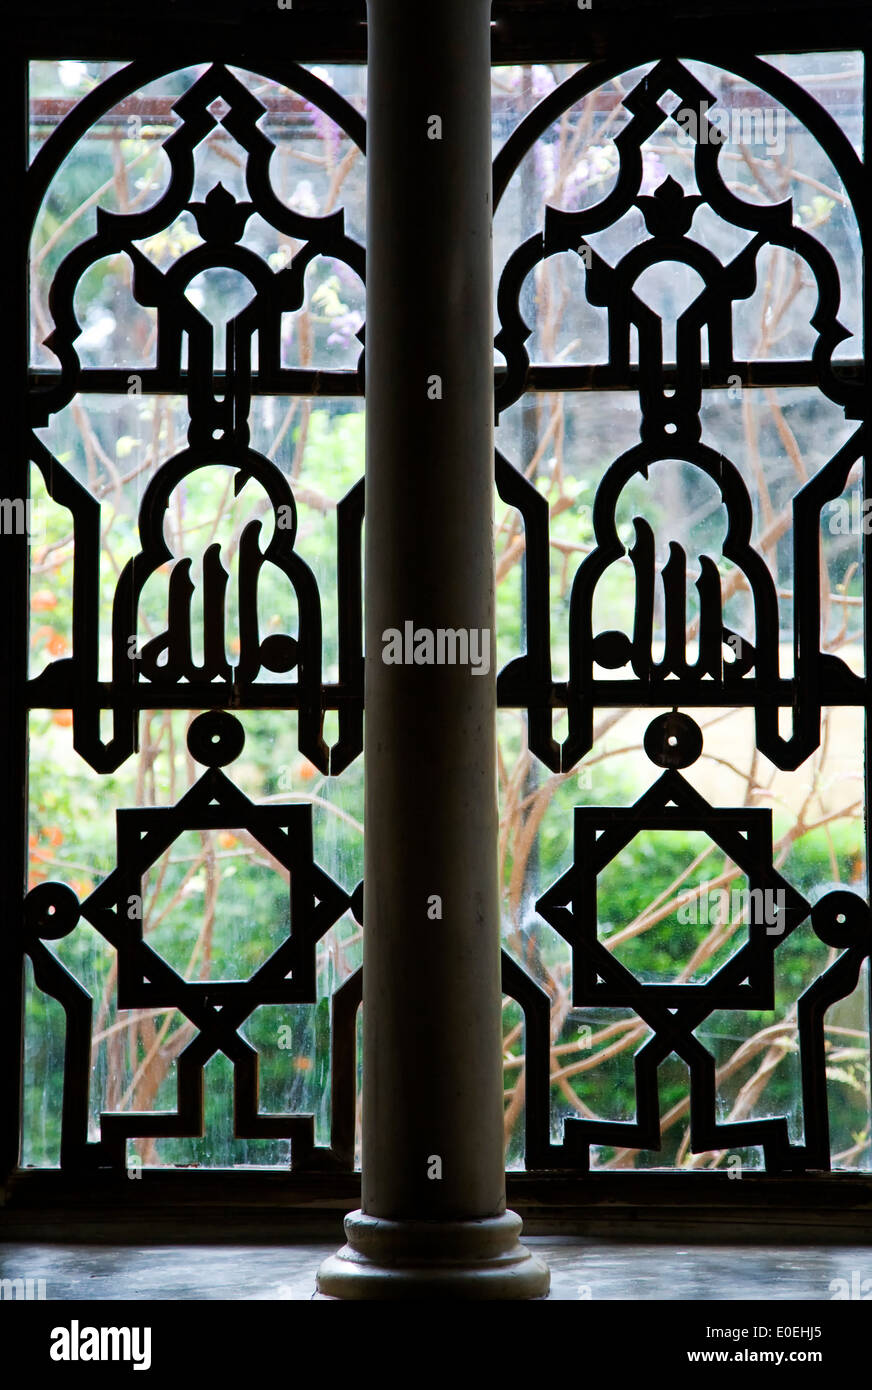 https://c8.alamy.com/comp/E0EHJ5/intricate-iron-window-grill-reales-alcazares-seville-spain-E0EHJ5.jpg